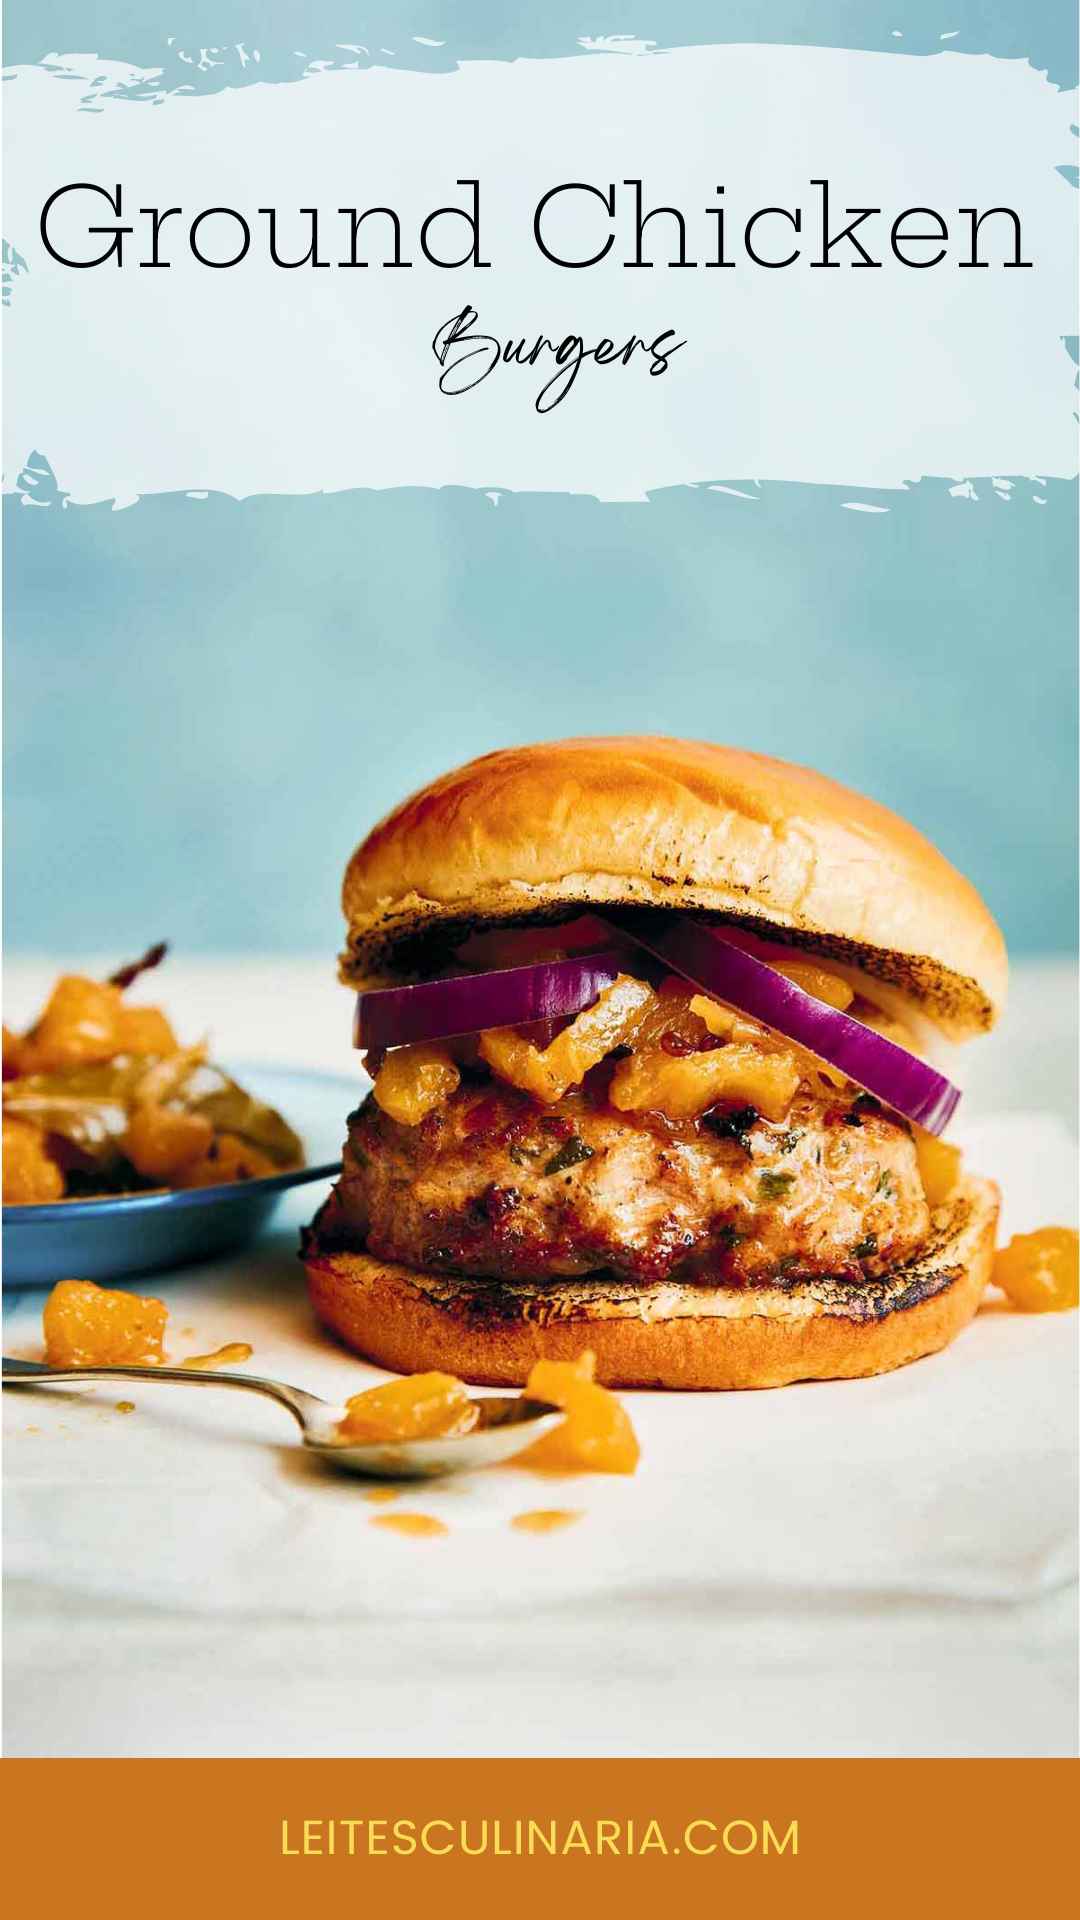 A ground chicken burger topped with red onion and chutney.